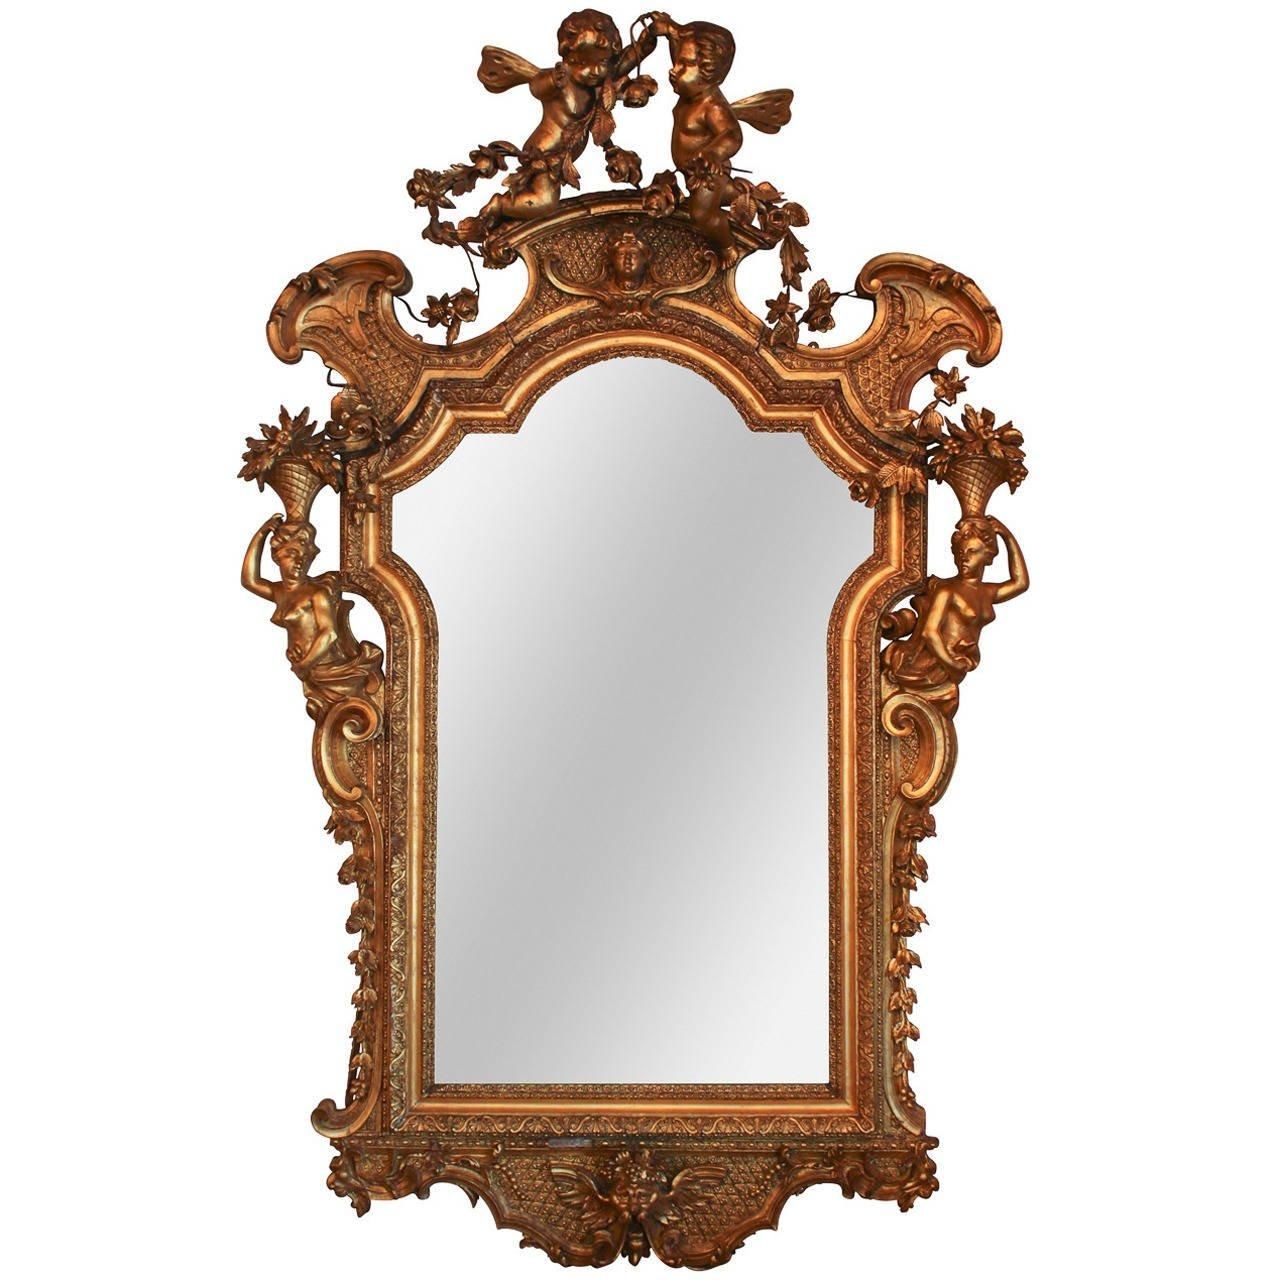 Rare 19Th C. French Rococo Giltwood Cherub Mirror For Sale At 1Stdibs Intended For French Rococo Mirror (Photo 3 of 20)